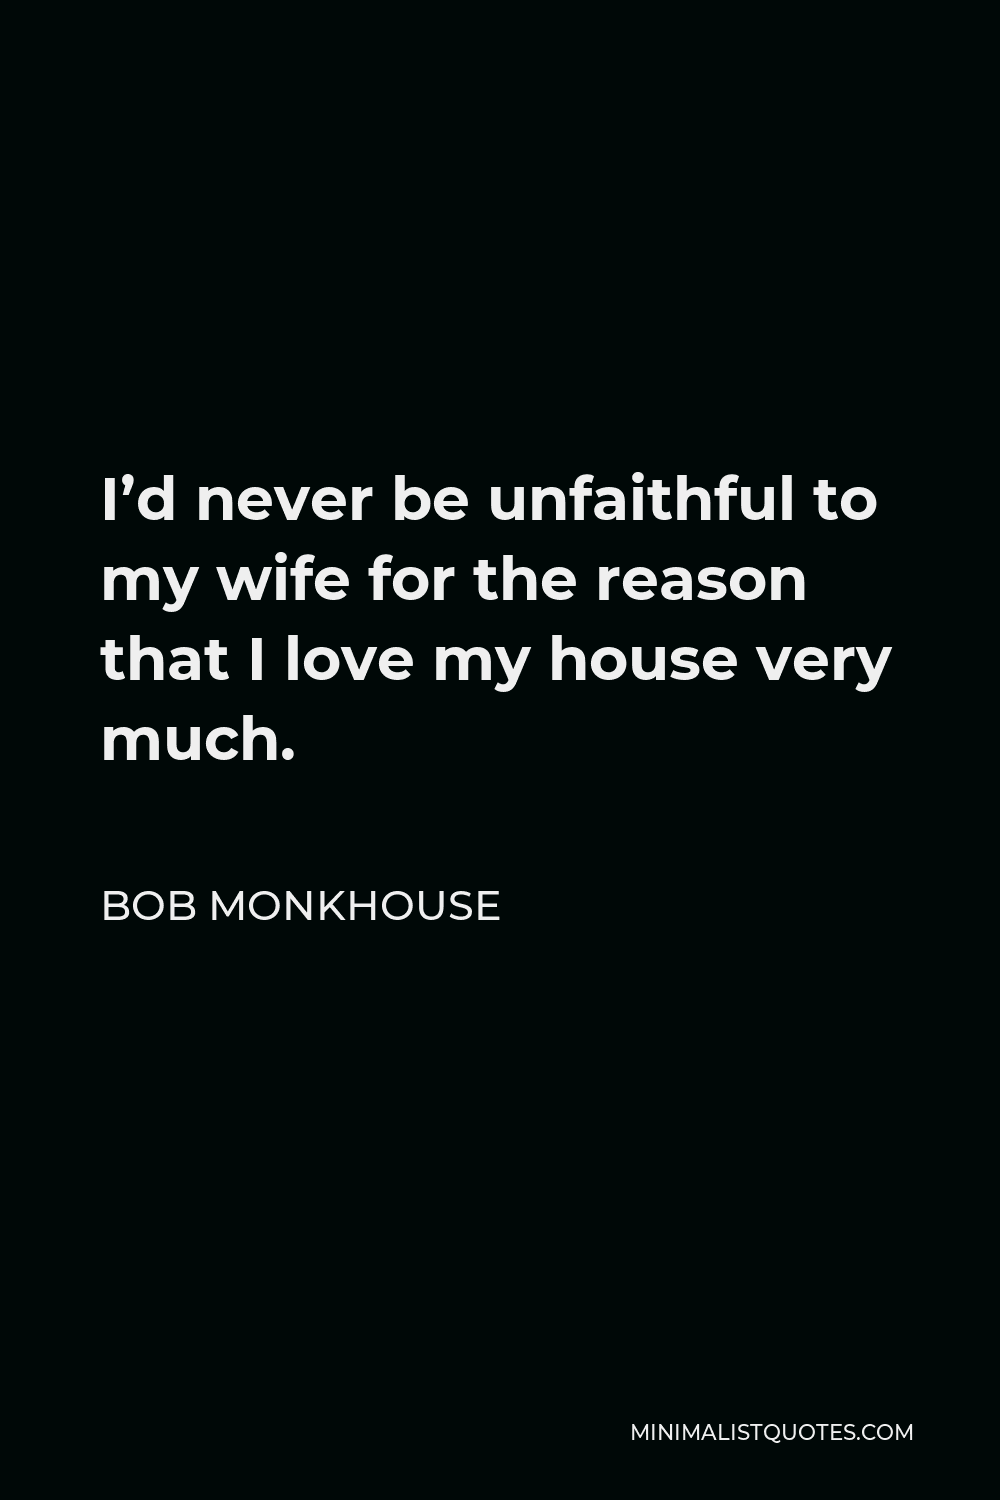 Bob Monkhouse Quote - I’d never be unfaithful to my wife for the reason that I love my house very much.